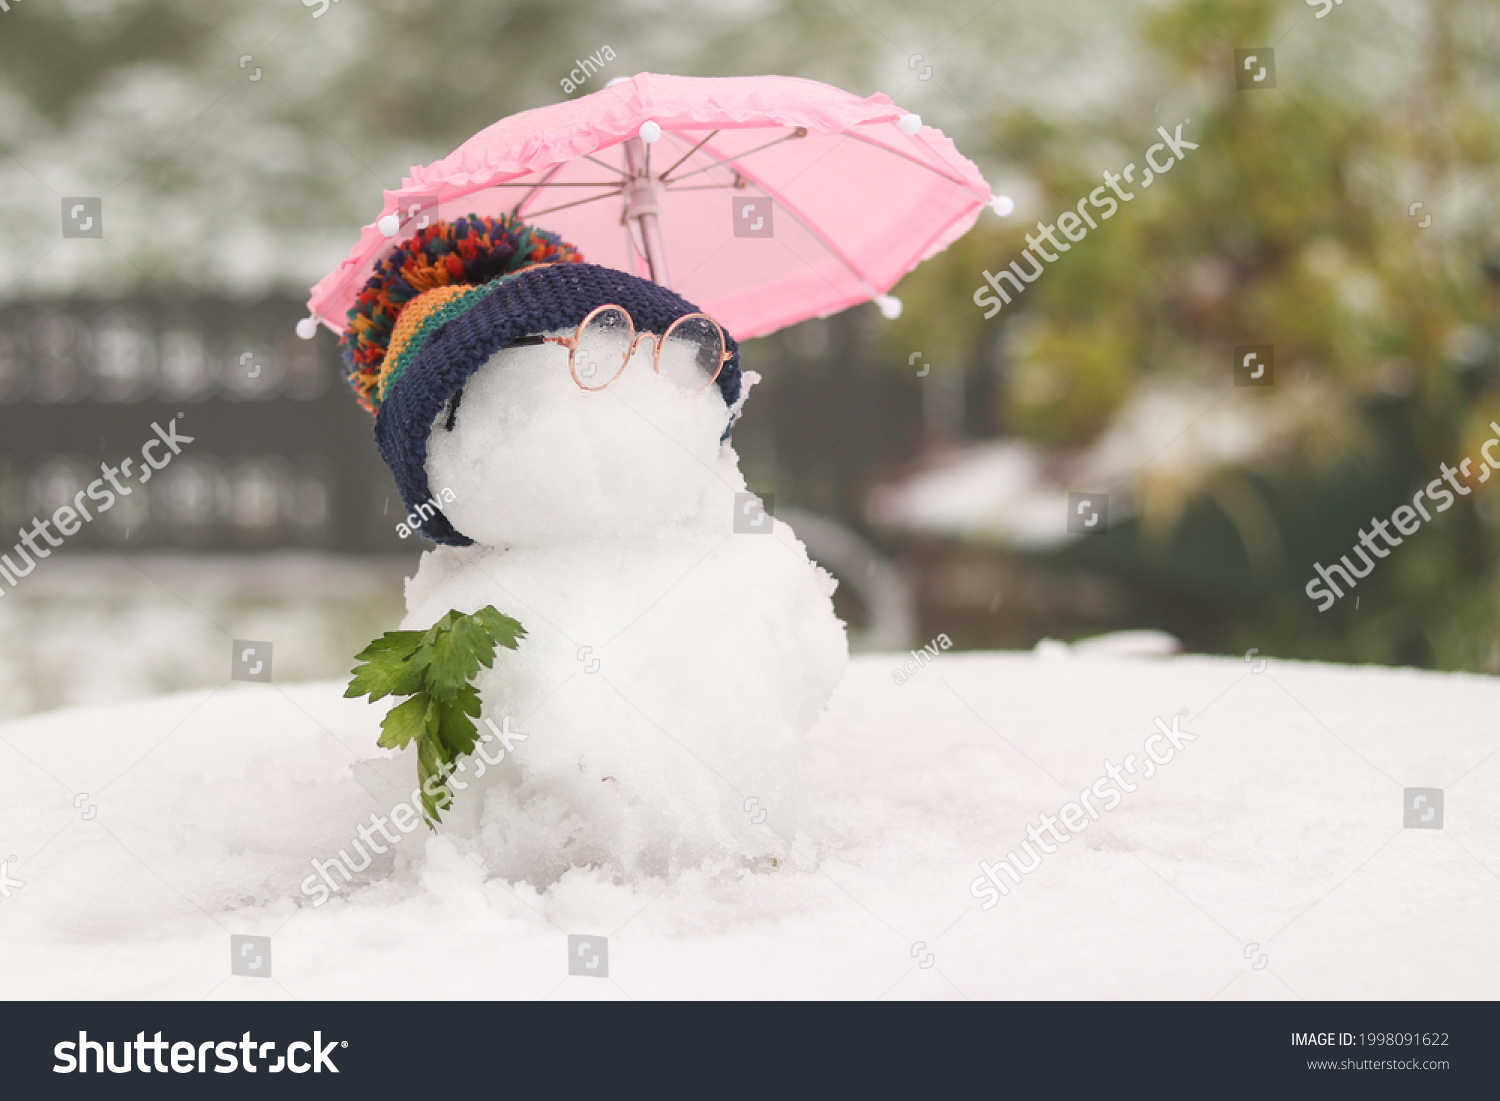 stock-photo-a-snowman-with-a-hat-and-glasses-1998091622.jpg